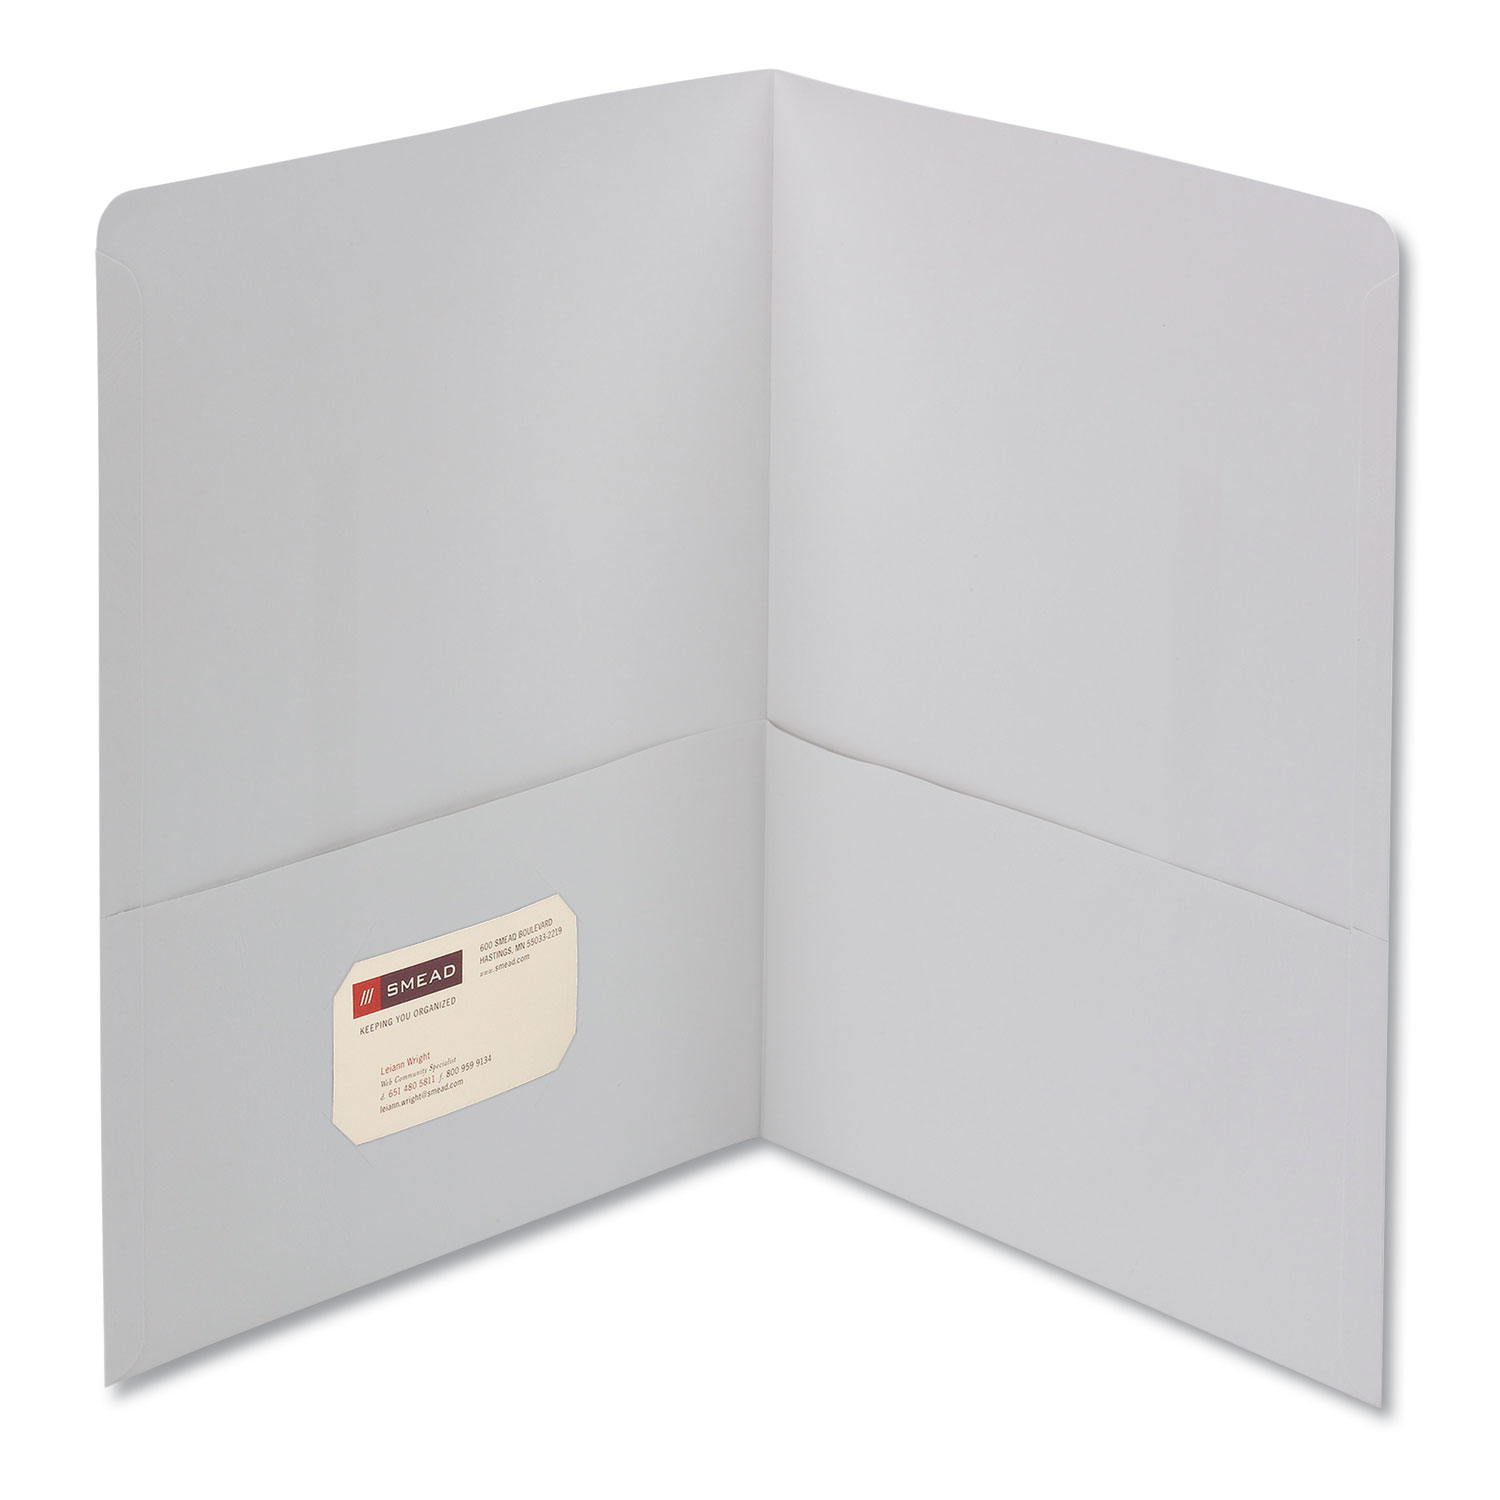  Smead 87861 Two-Pocket Folder, Textured Paper, White, 25/Box (SMD87861) 